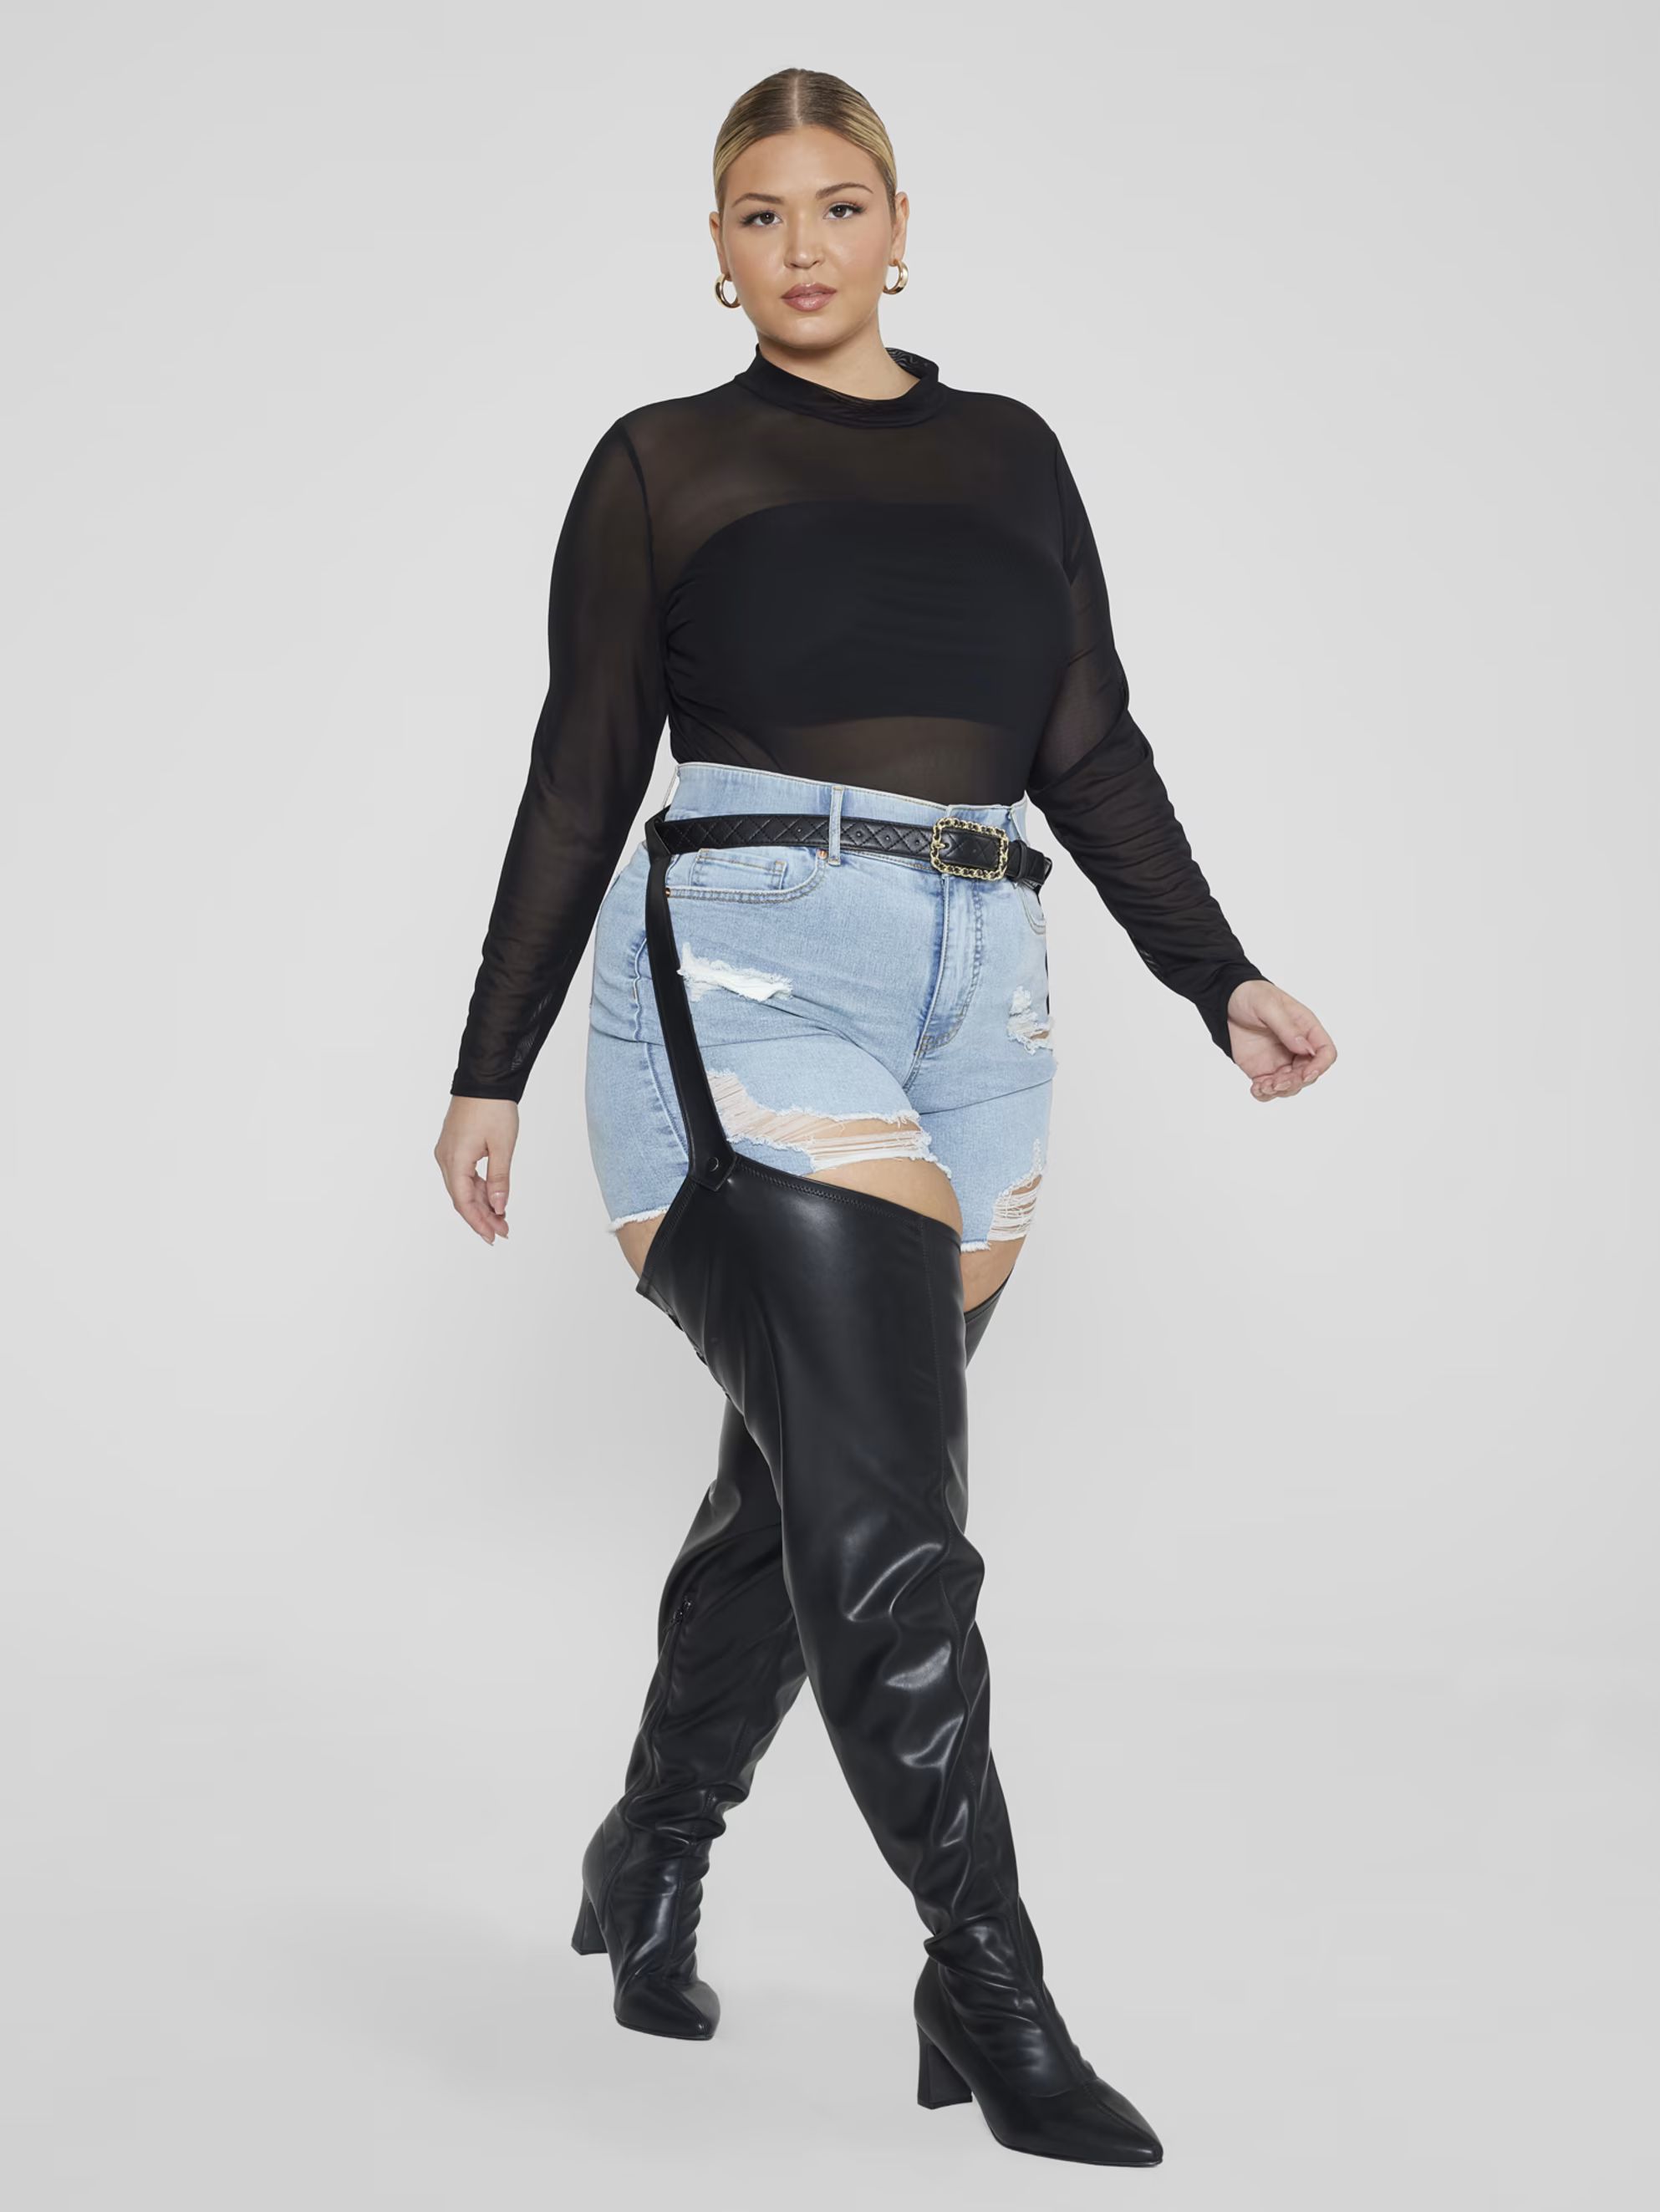 Plus Size Krista Wide Calf Thigh-High Boots with Belt Strap | Fashion to Figure | Fashion To Figure